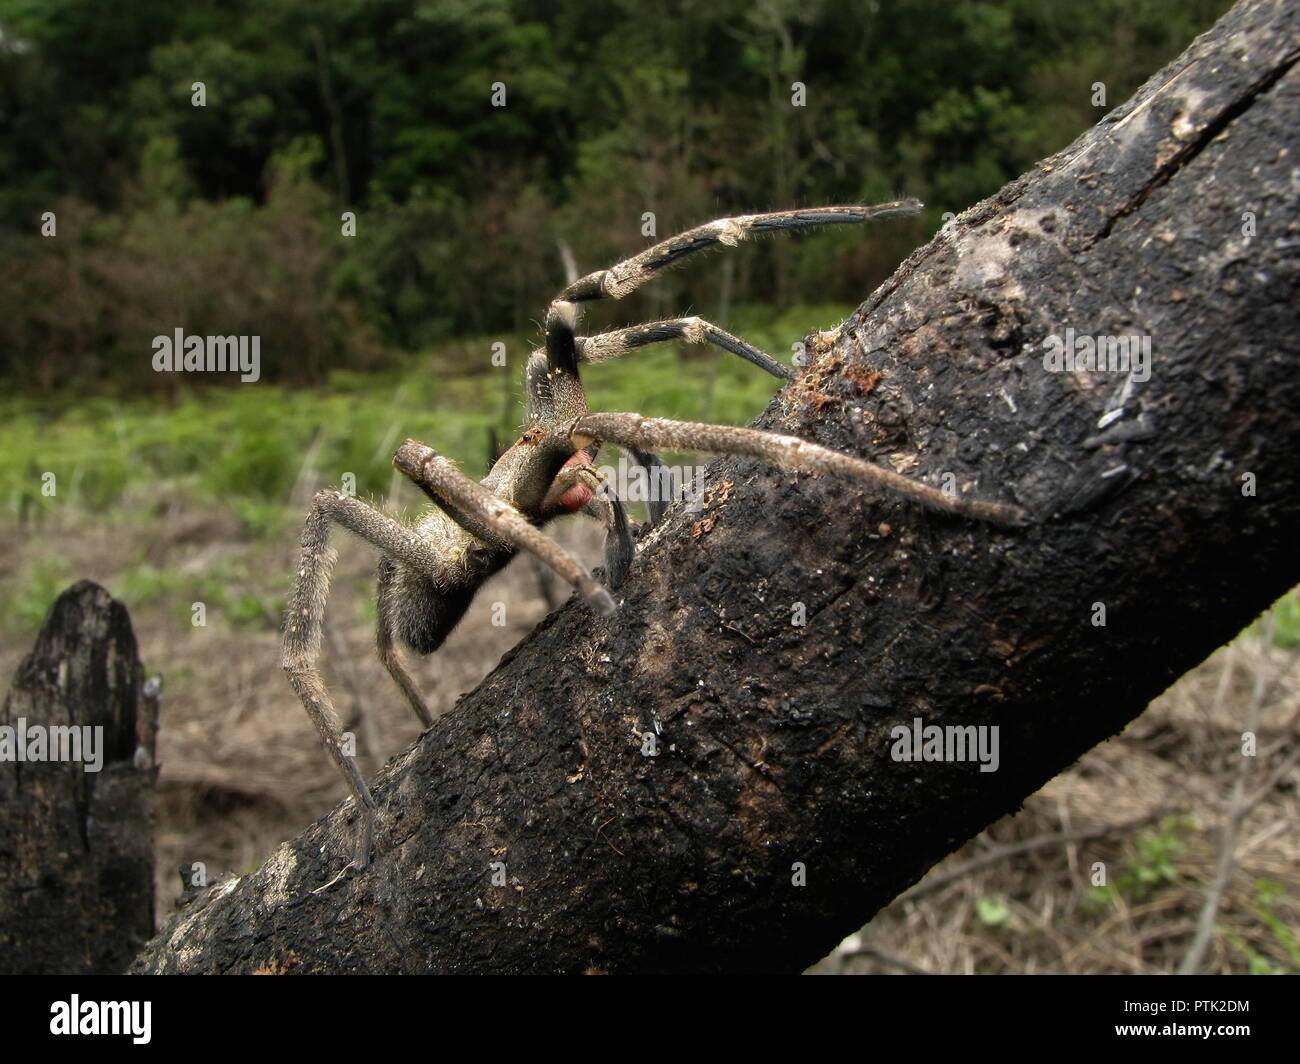 Brazilian wandering spider (armadeira) walking on wood, venomous spider from south america also known as Phoneutria, with a few lethal bites. Stock Photo